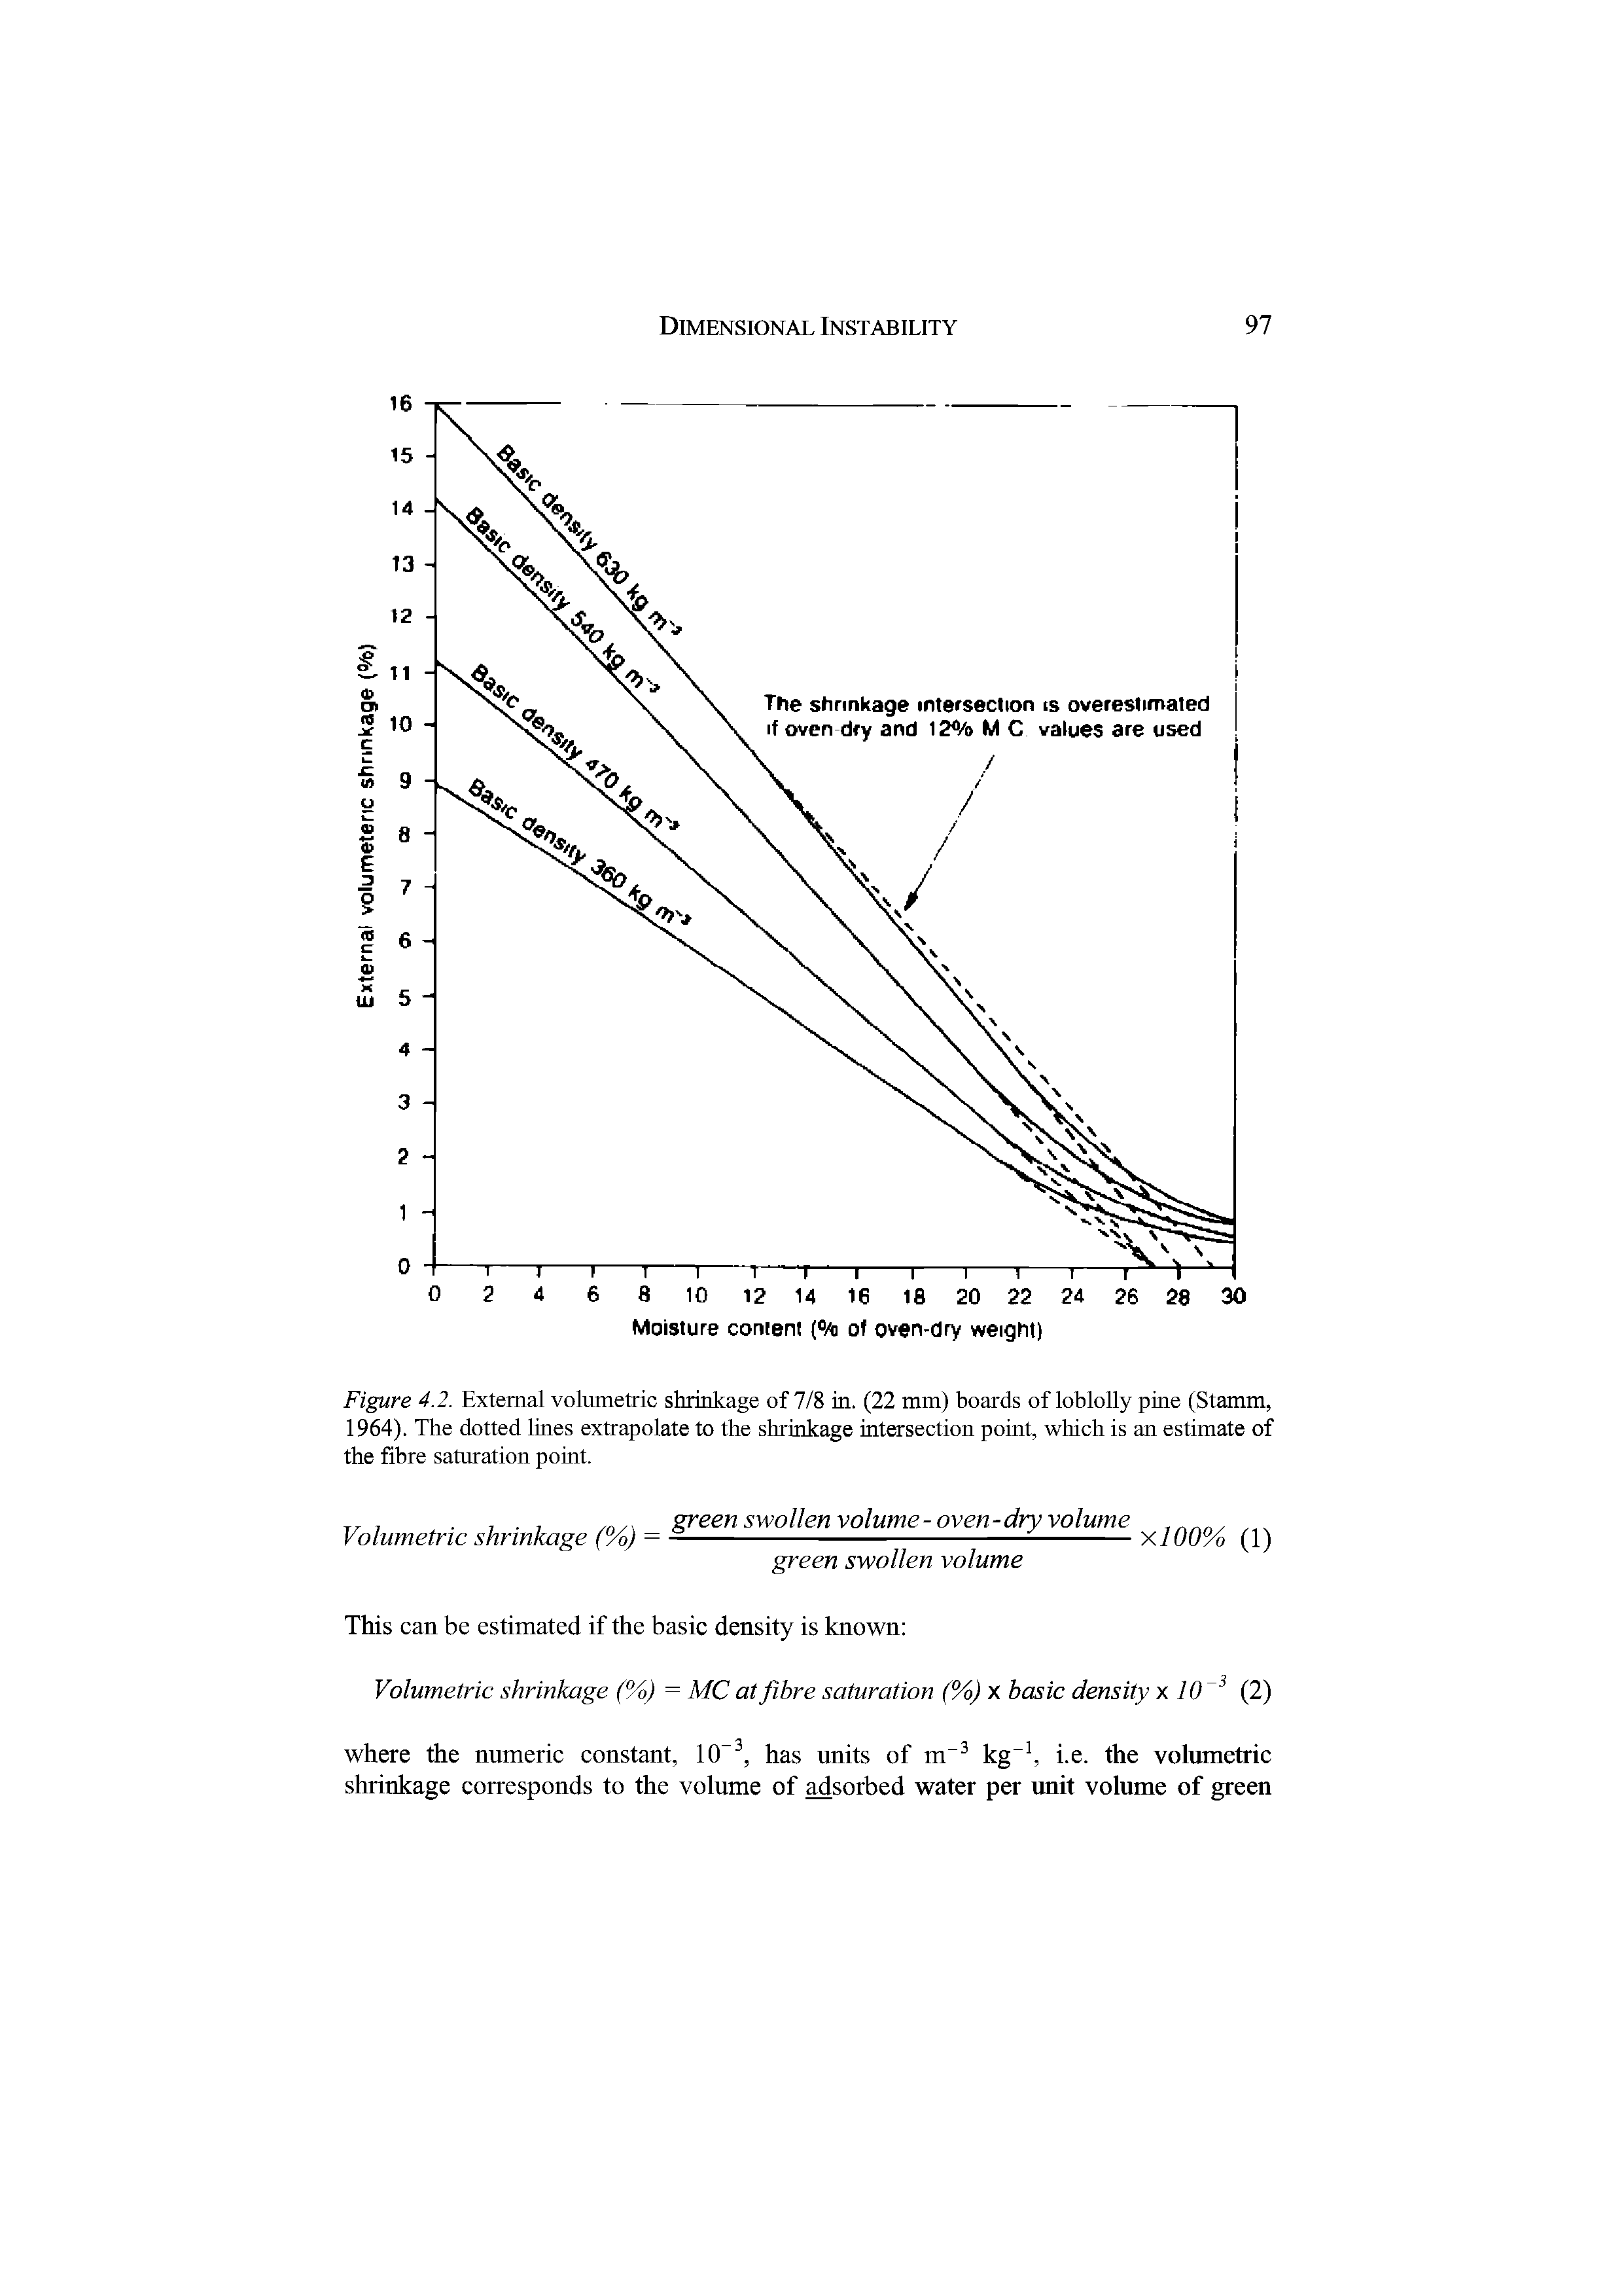 Figure 4.2. External volumetric shrinkage of 7/8 in. (22 mm) boards of loblolly pine (Stamm, 1964). The dotted lines extrapolate to the shrinkage intersection point, which is an estimate of the fibre saturation point.